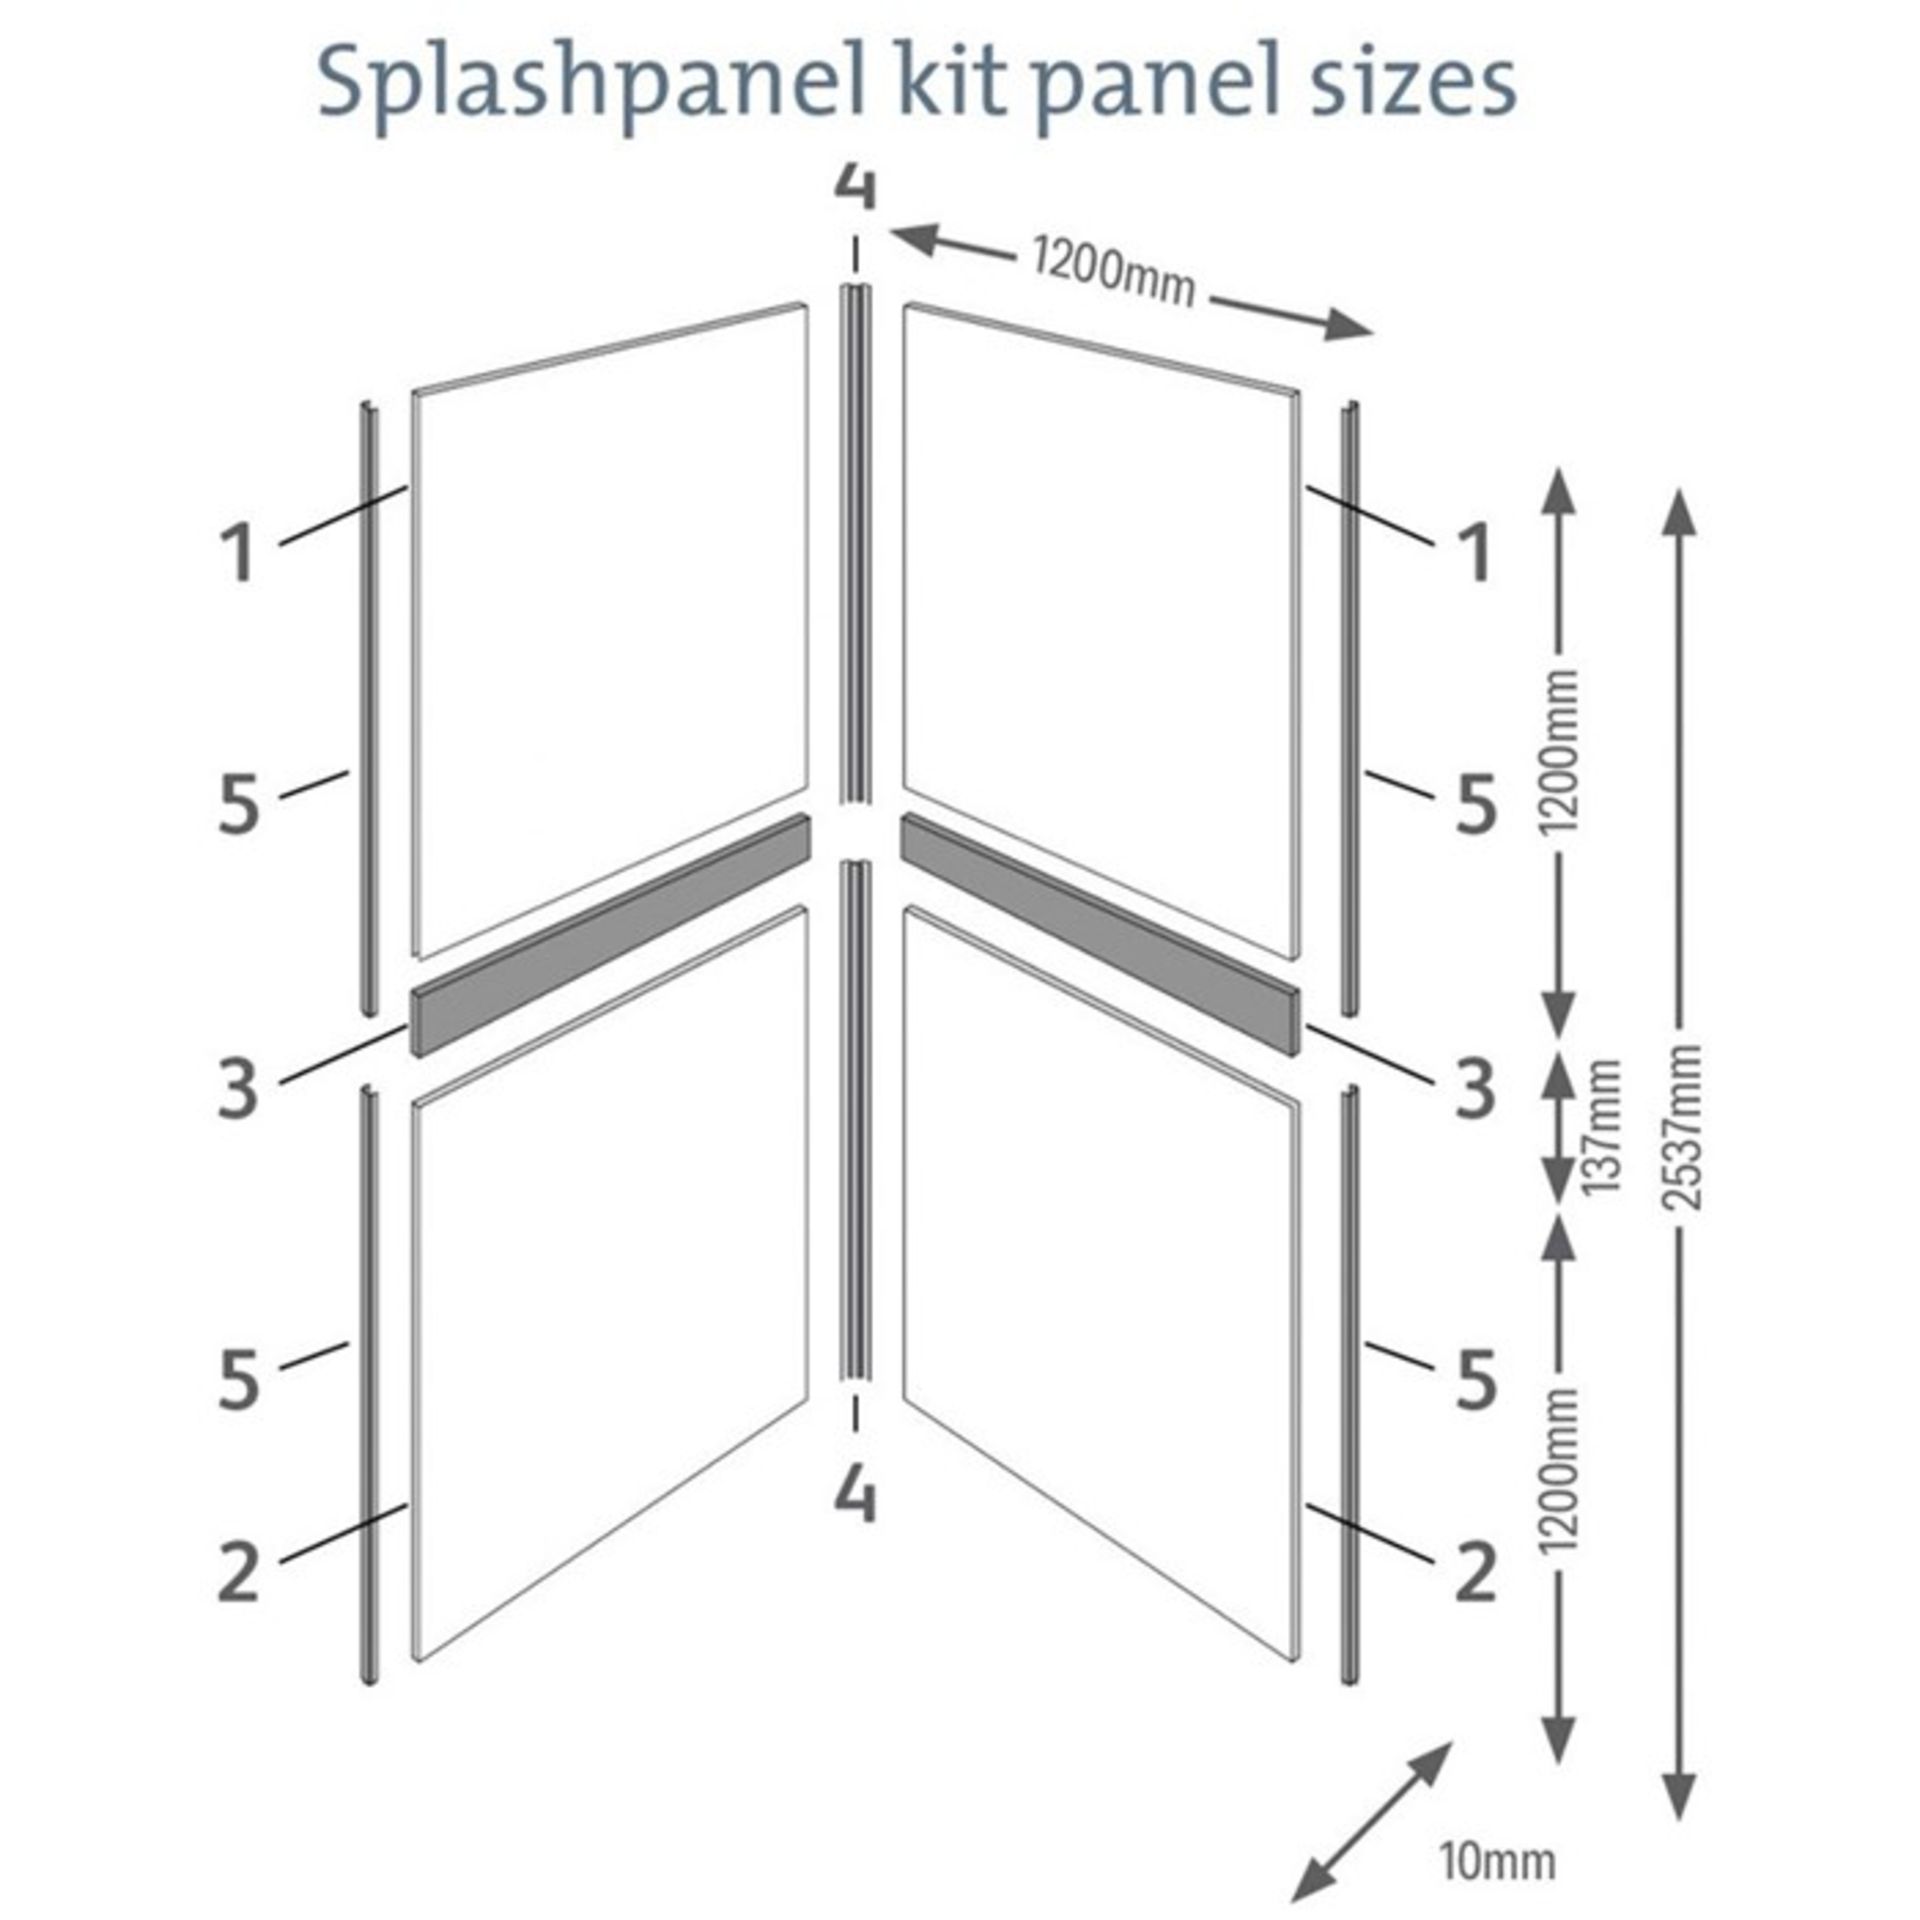 Splash Panel 2 sided shower wall kit in Artic Sparkle gloss, new and boxed, the kit contains 2 - Image 3 of 3